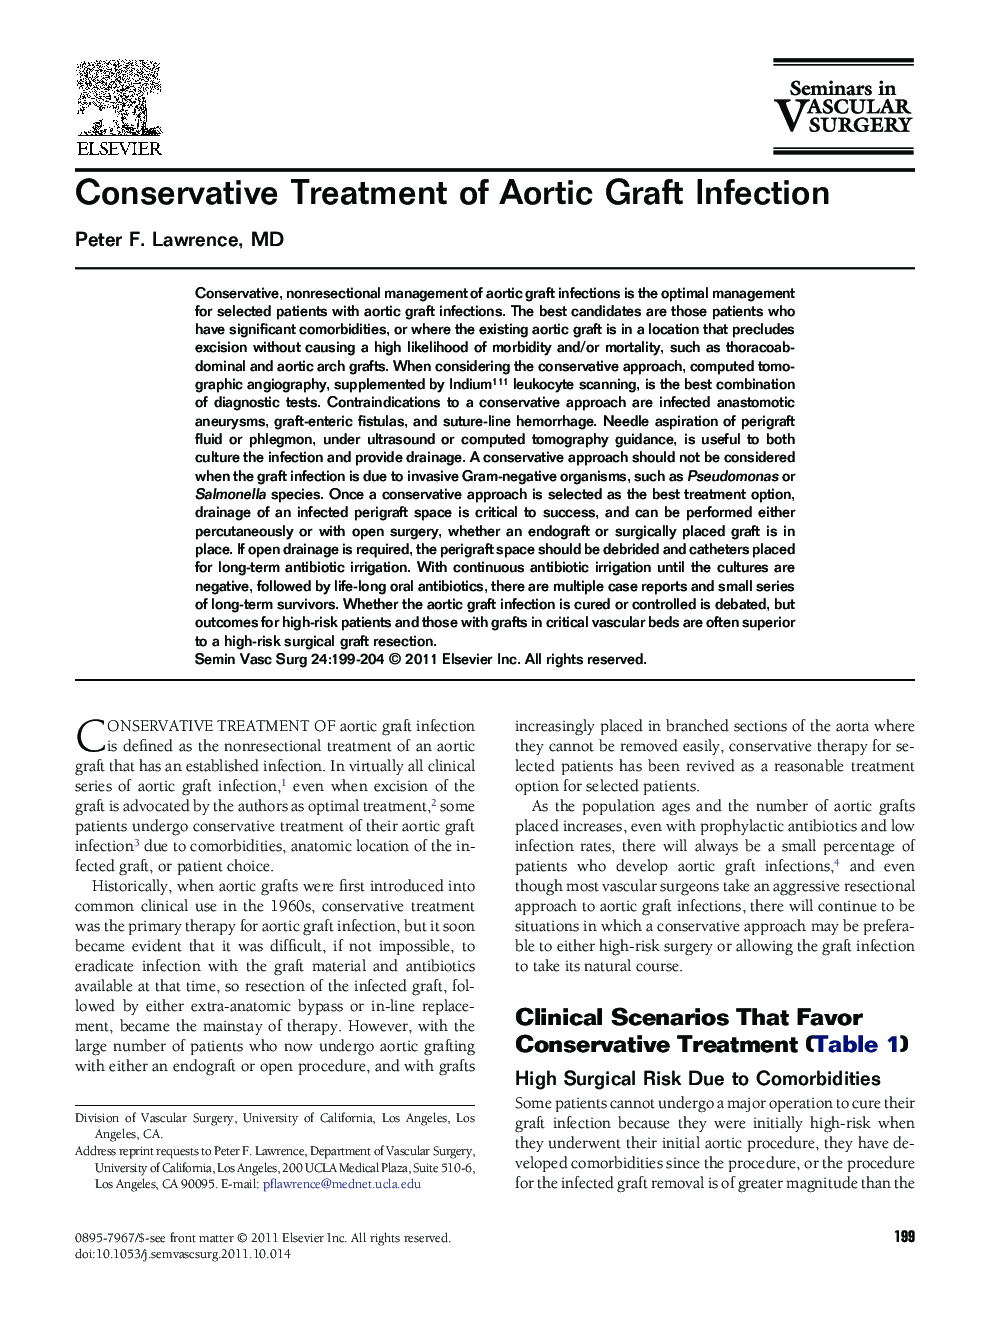 Conservative Treatment of Aortic Graft Infection